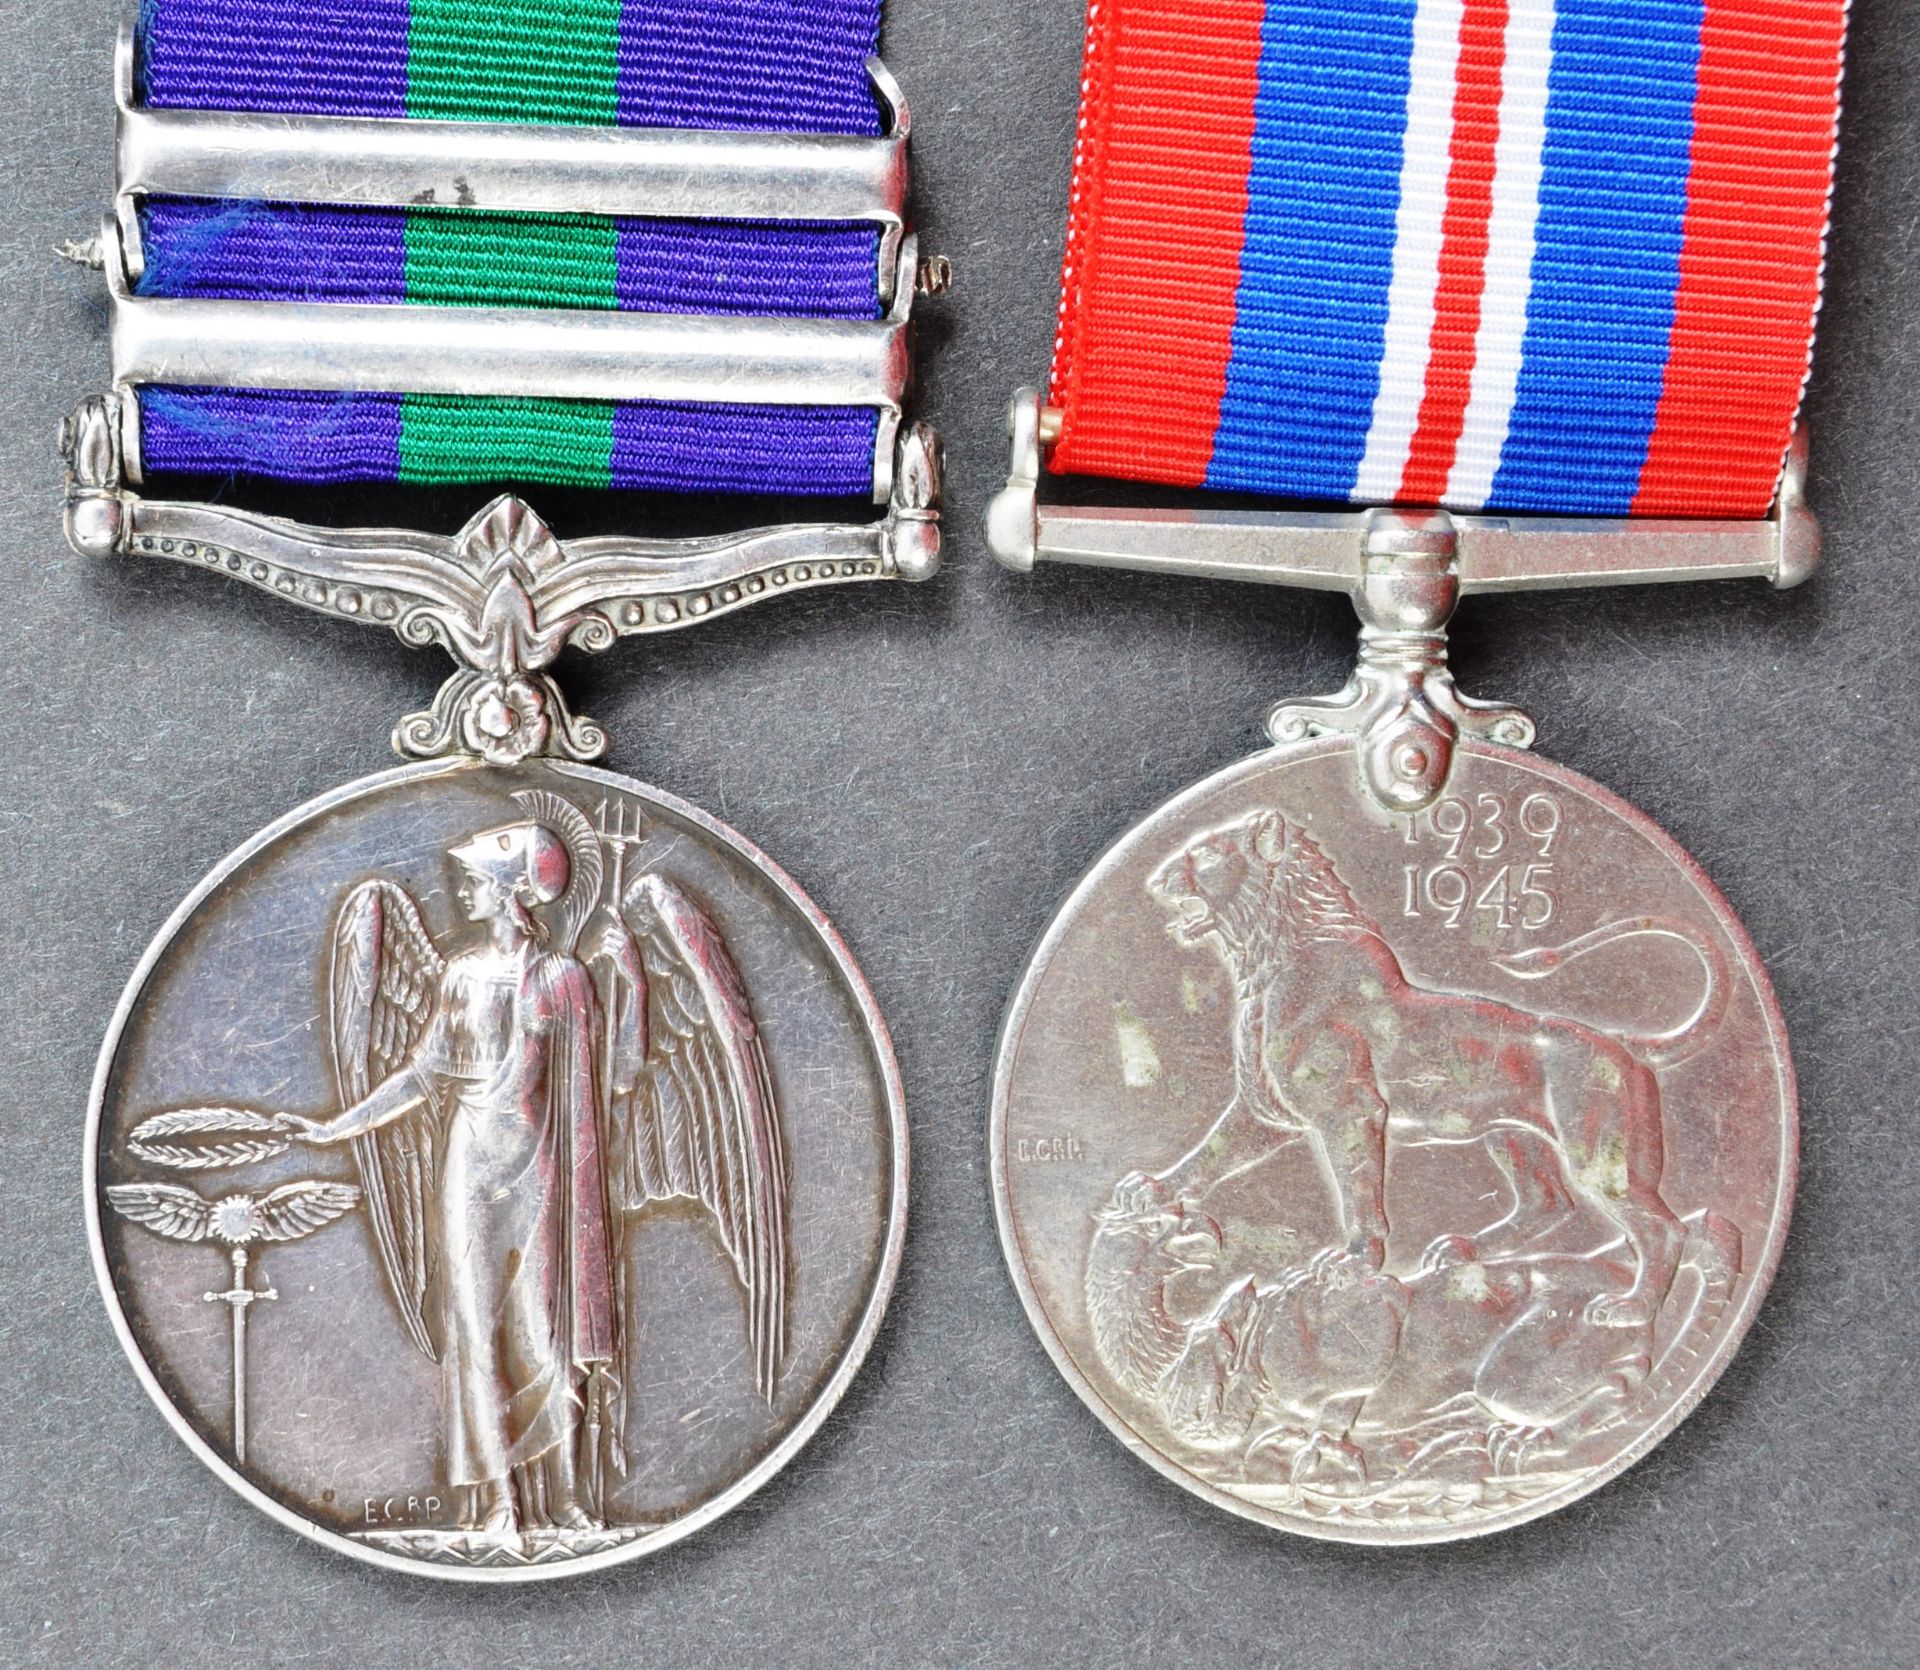 WWII SECOND WORLD WAR MEDAL GROUP - ROYAL ARTILLERY - MALAYA - Image 4 of 5